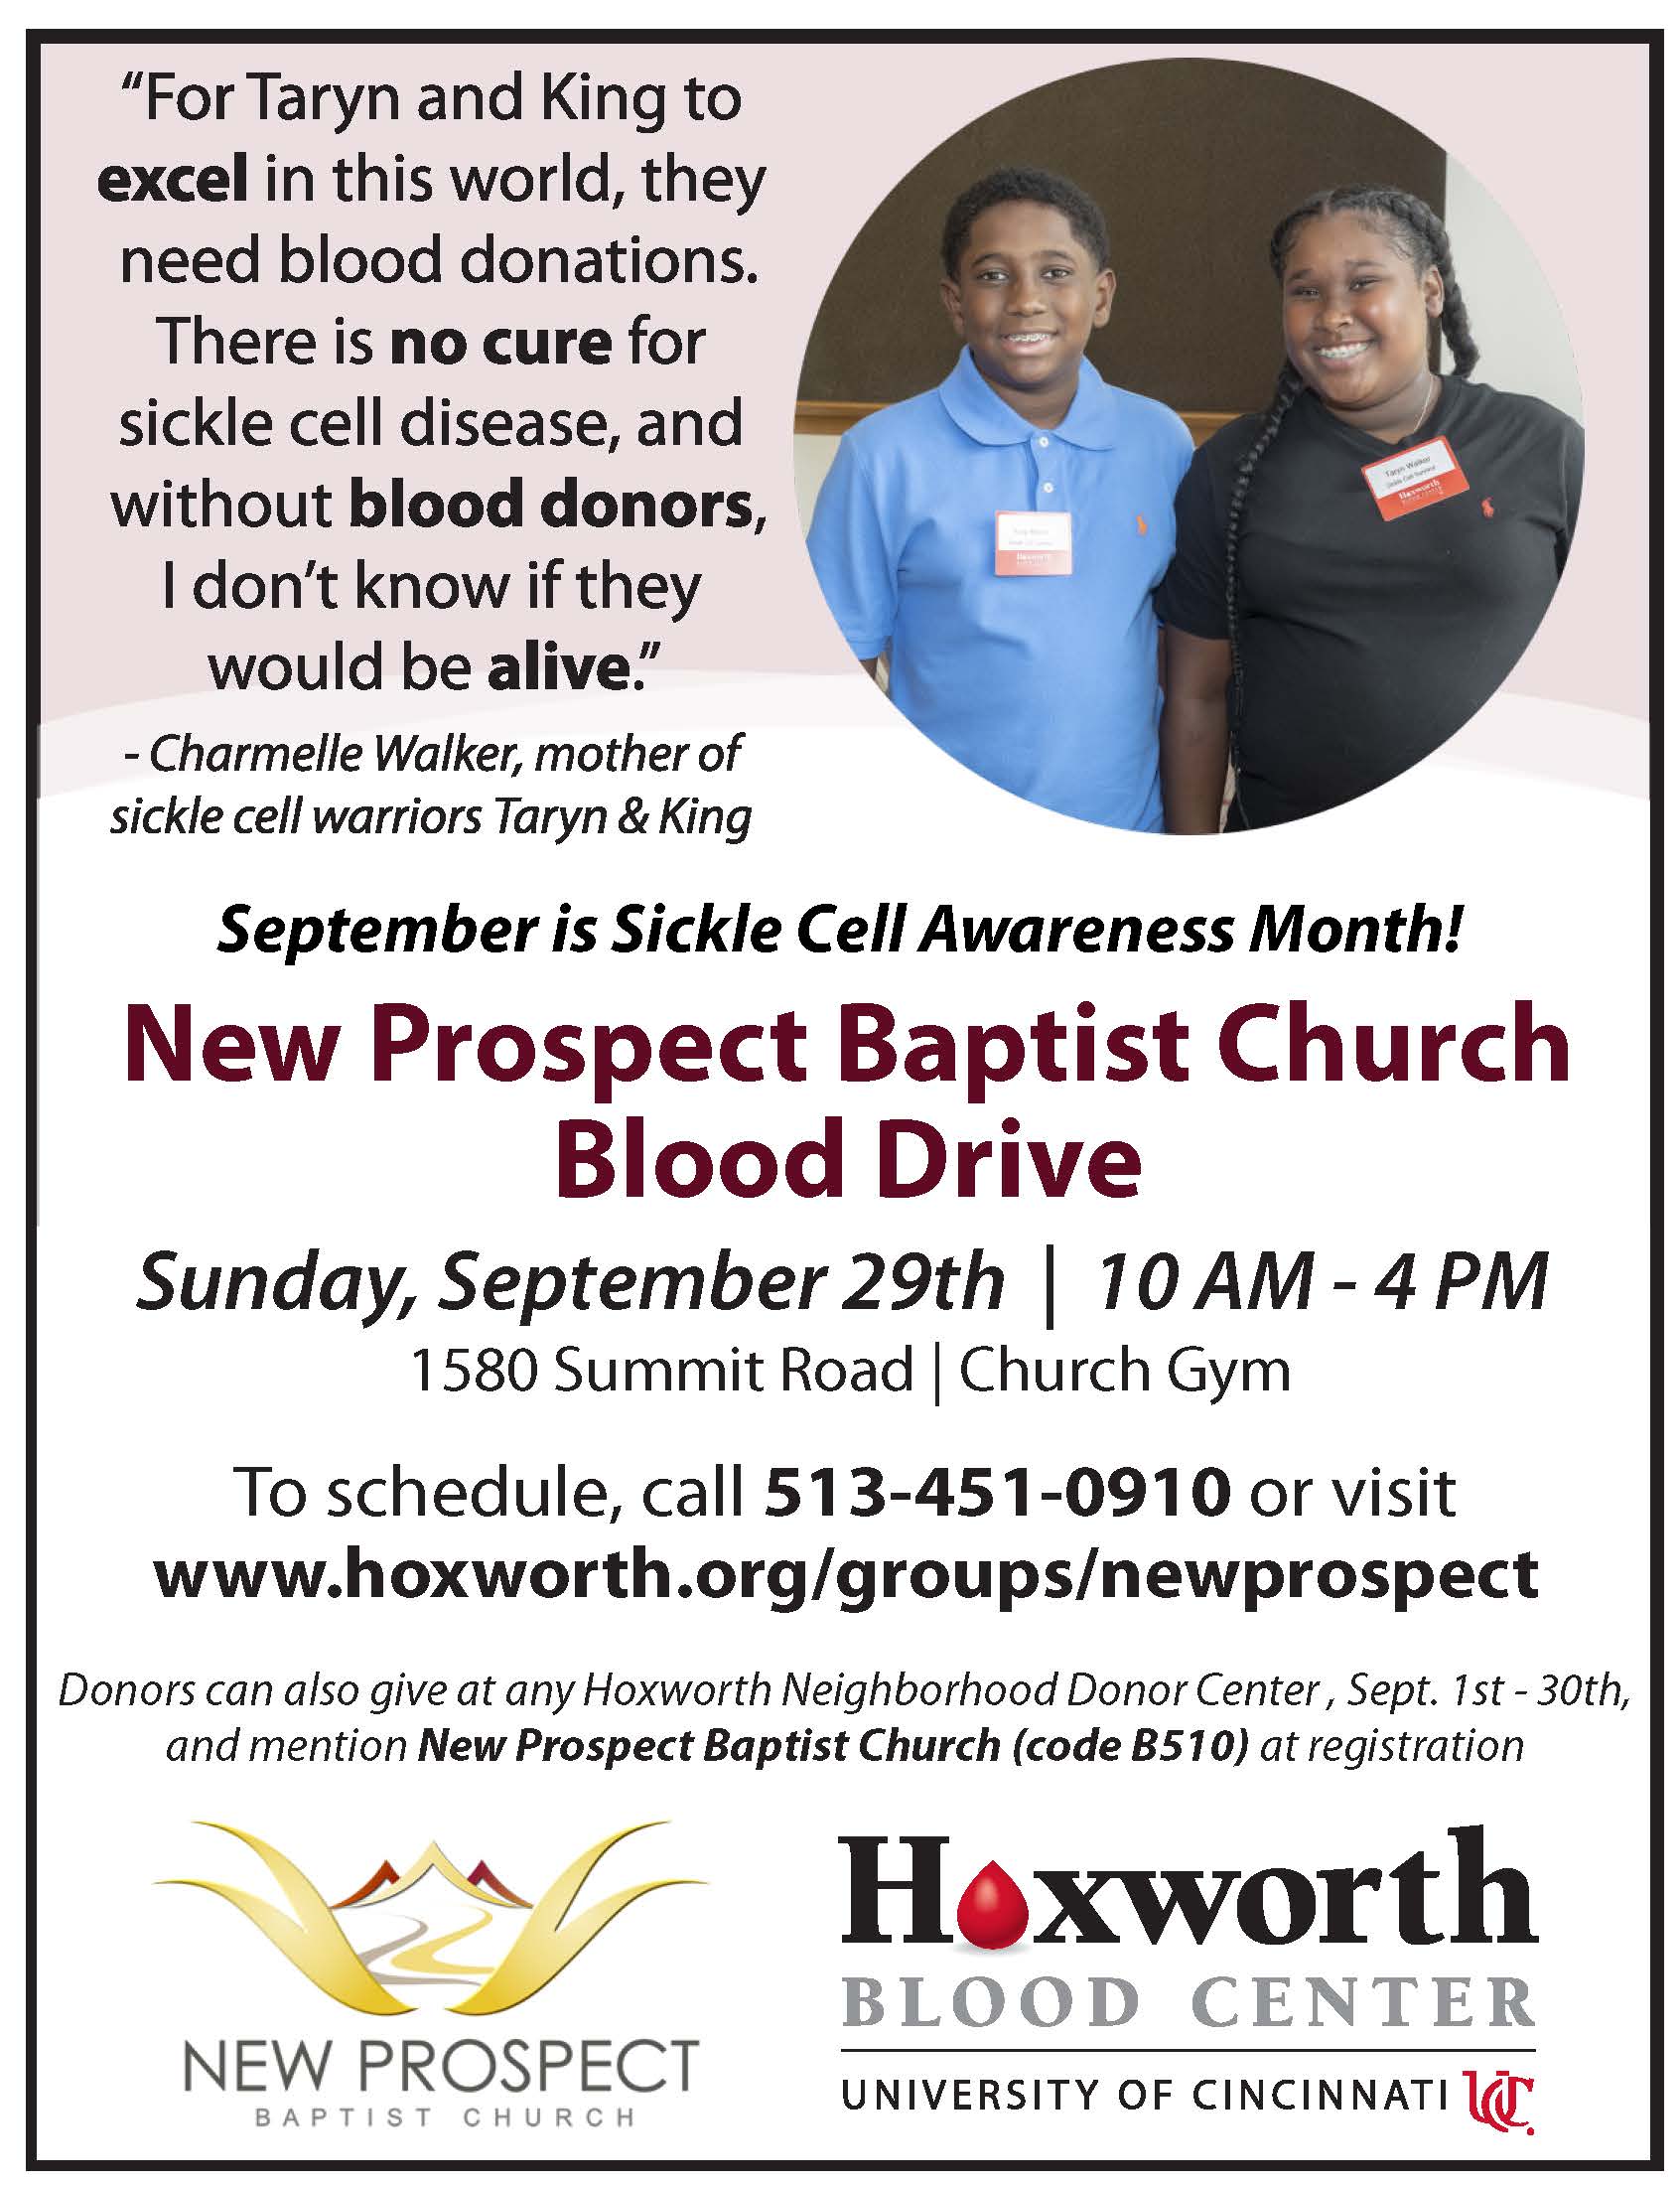 New Prospect Blood Drive on Sunday September 29th 10 am to 4 pm